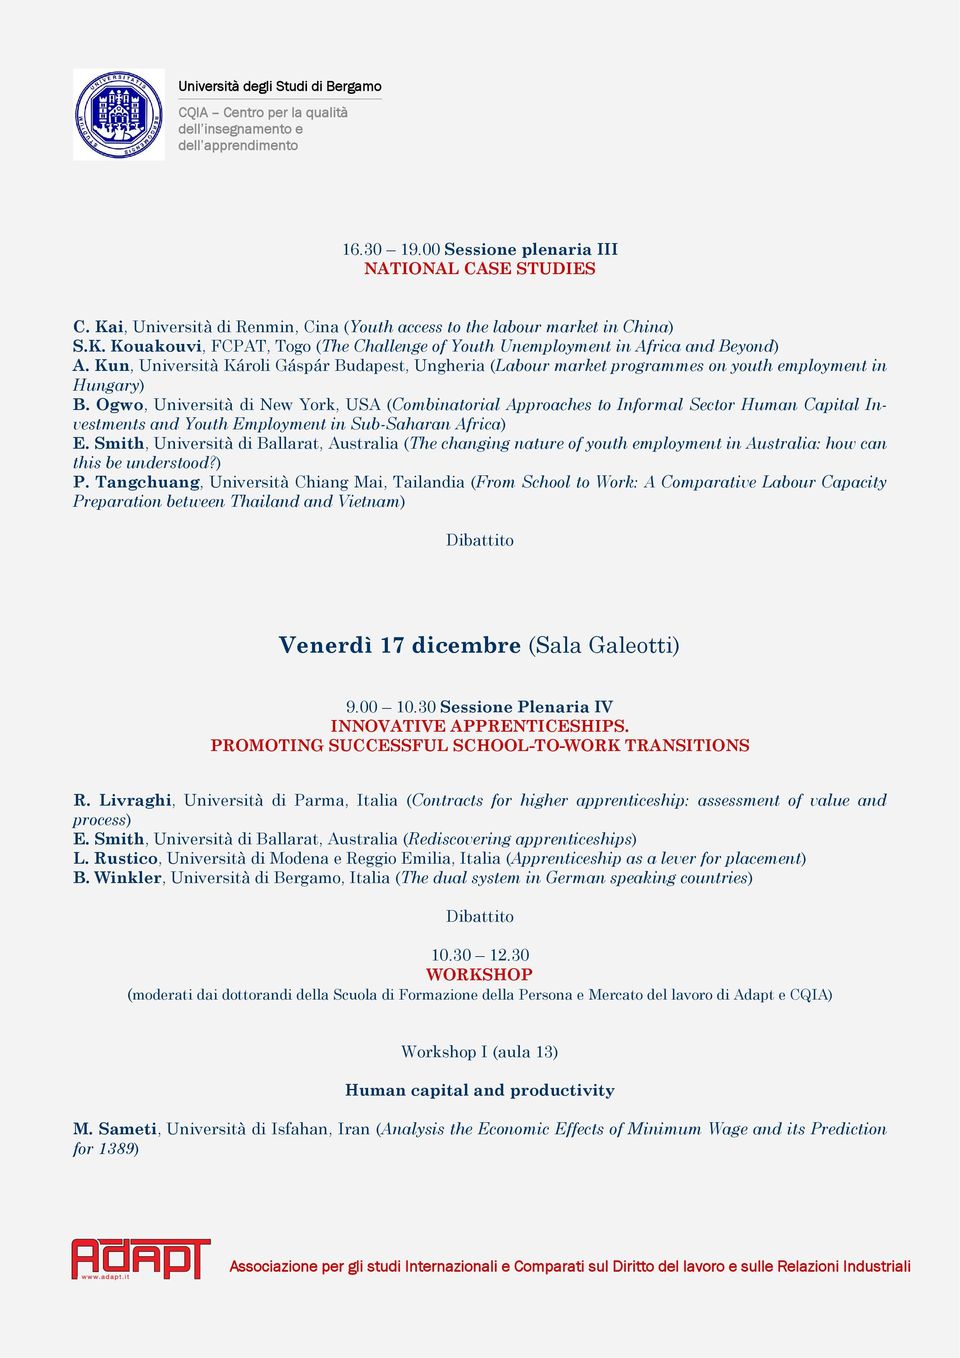 Ogwo, Università di New York, USA (Combinatorial Approaches to Informal Sector Human Capital Investments and Youth Employment in Sub-Saharan Africa) E.